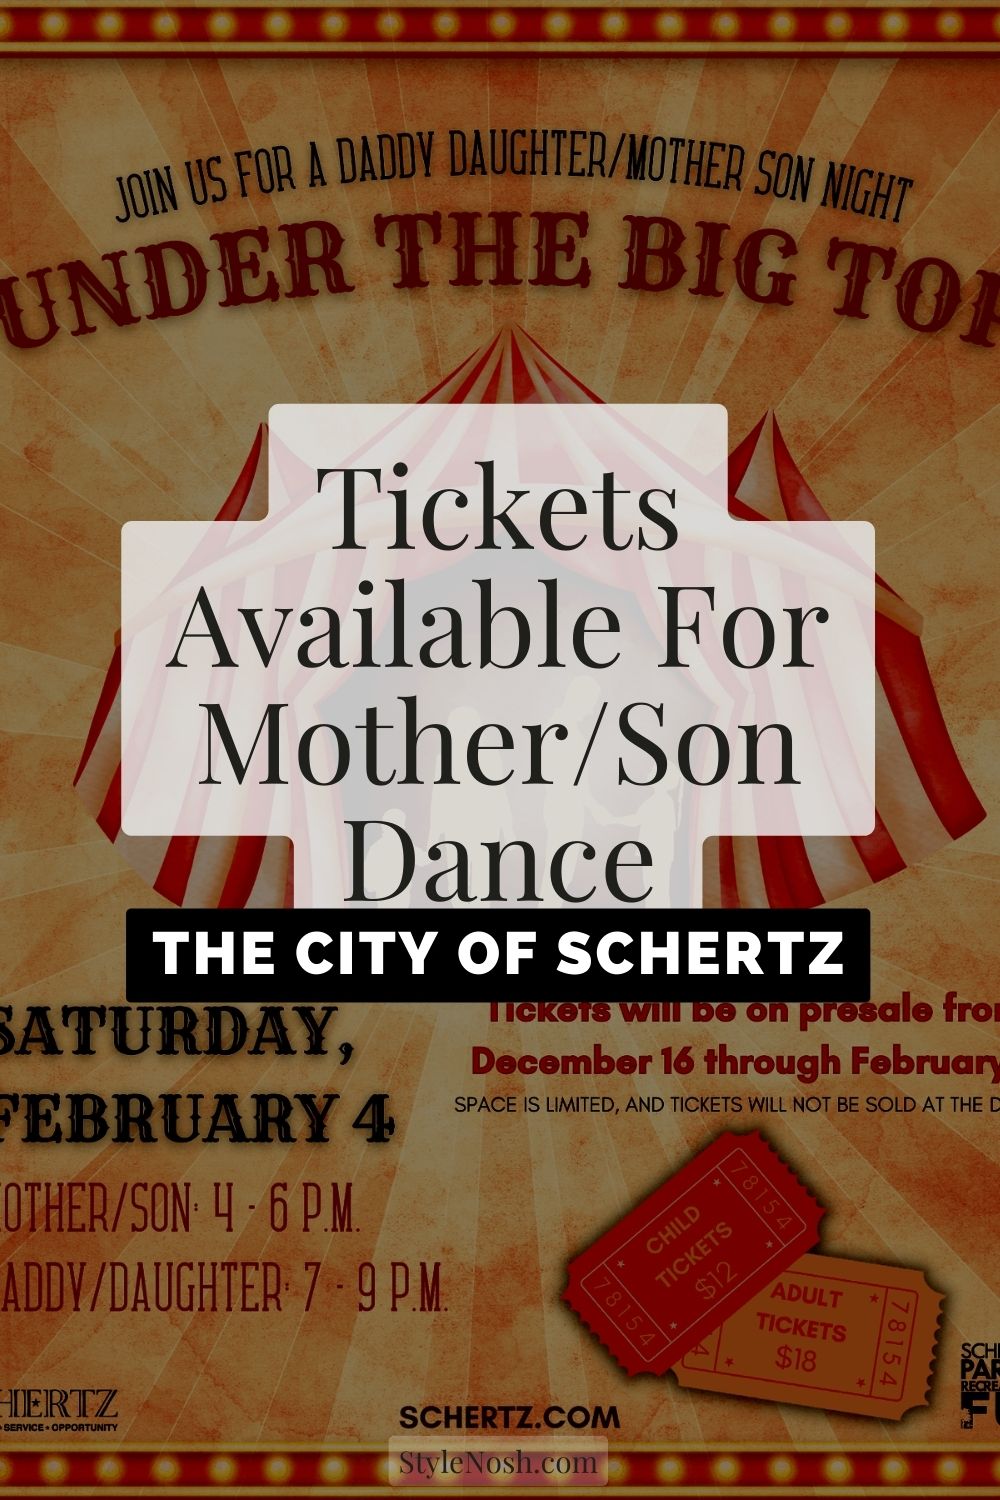 Grab the Tickets Available For MotherSon Dance At The City of Schertz